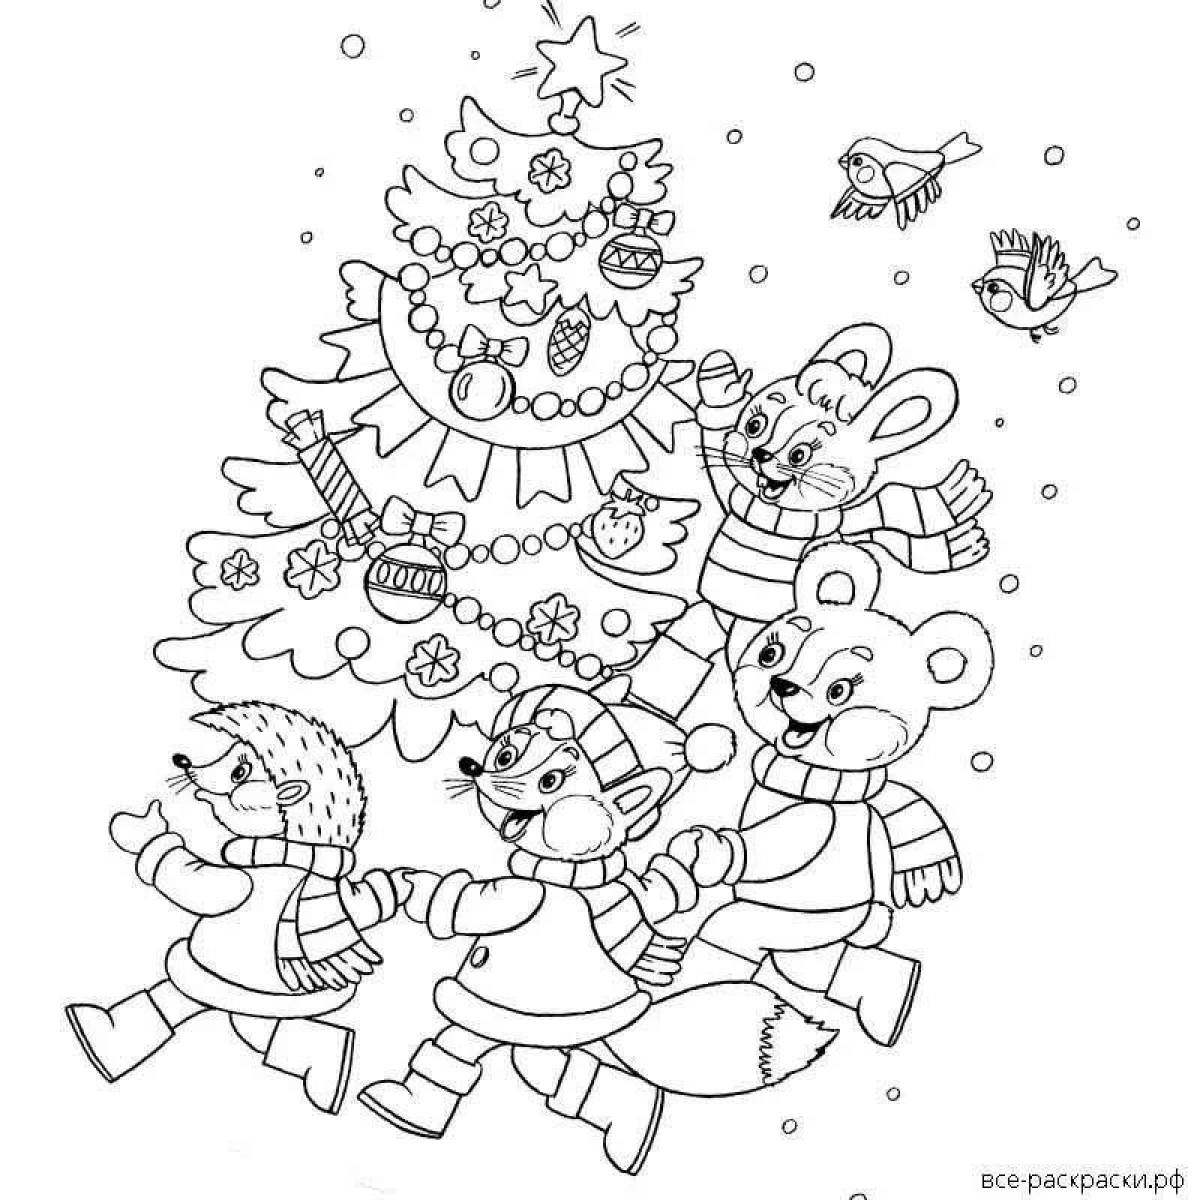 Coloring page charming round dance